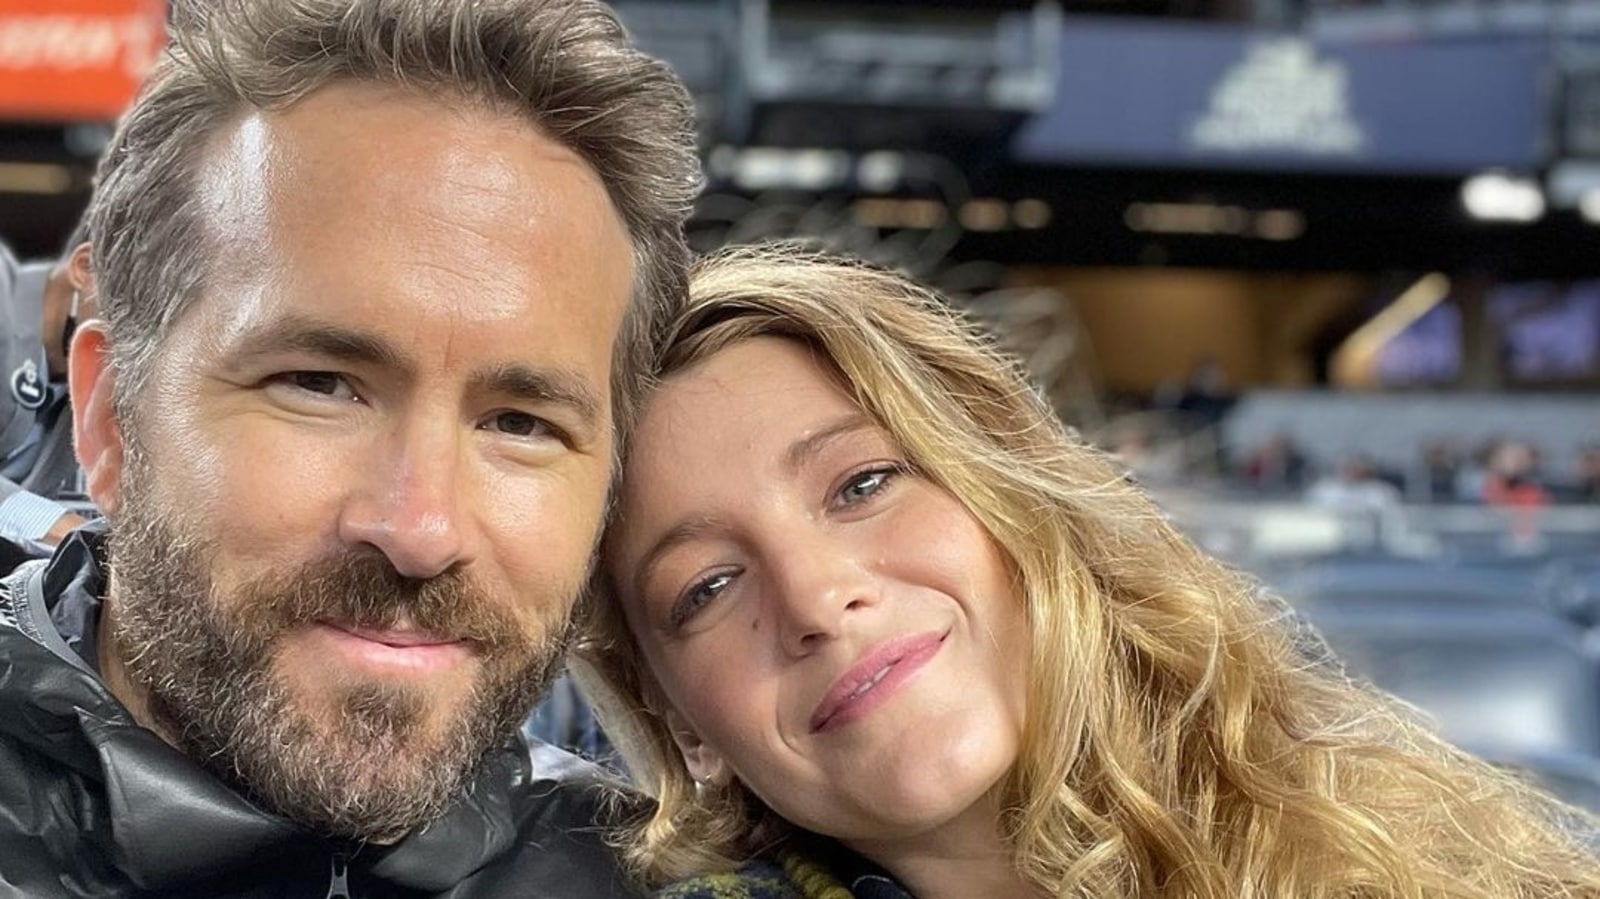 Ryan Reynolds While Appreciating Blake Lively Says Their Relationship Started With ‘anonymous